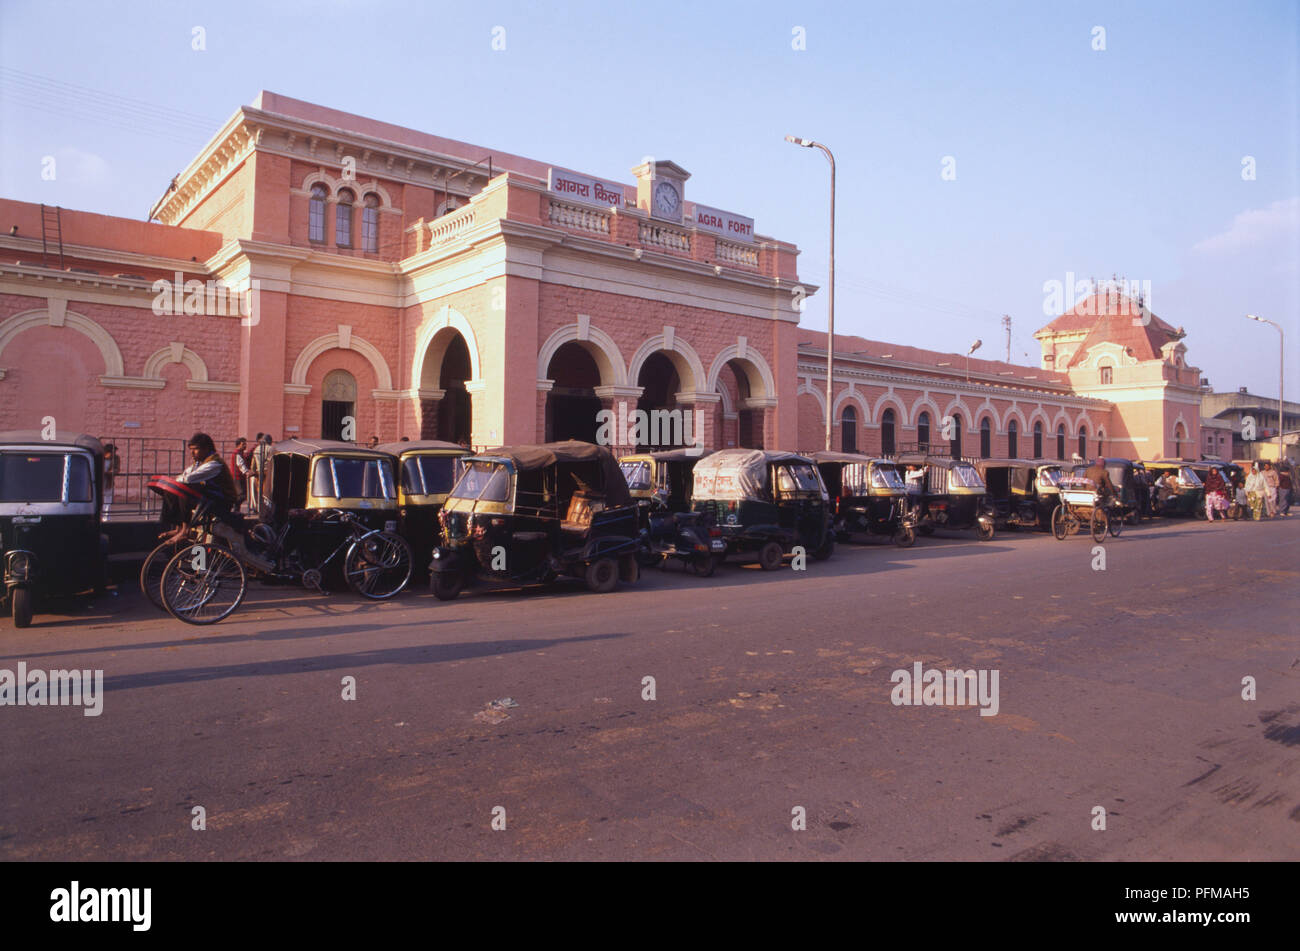 India, Agra, the Fort Railway Station, colonial pink and white building, many towers, clock above entrance, auto-rickshaws parked outside . Stock Photo